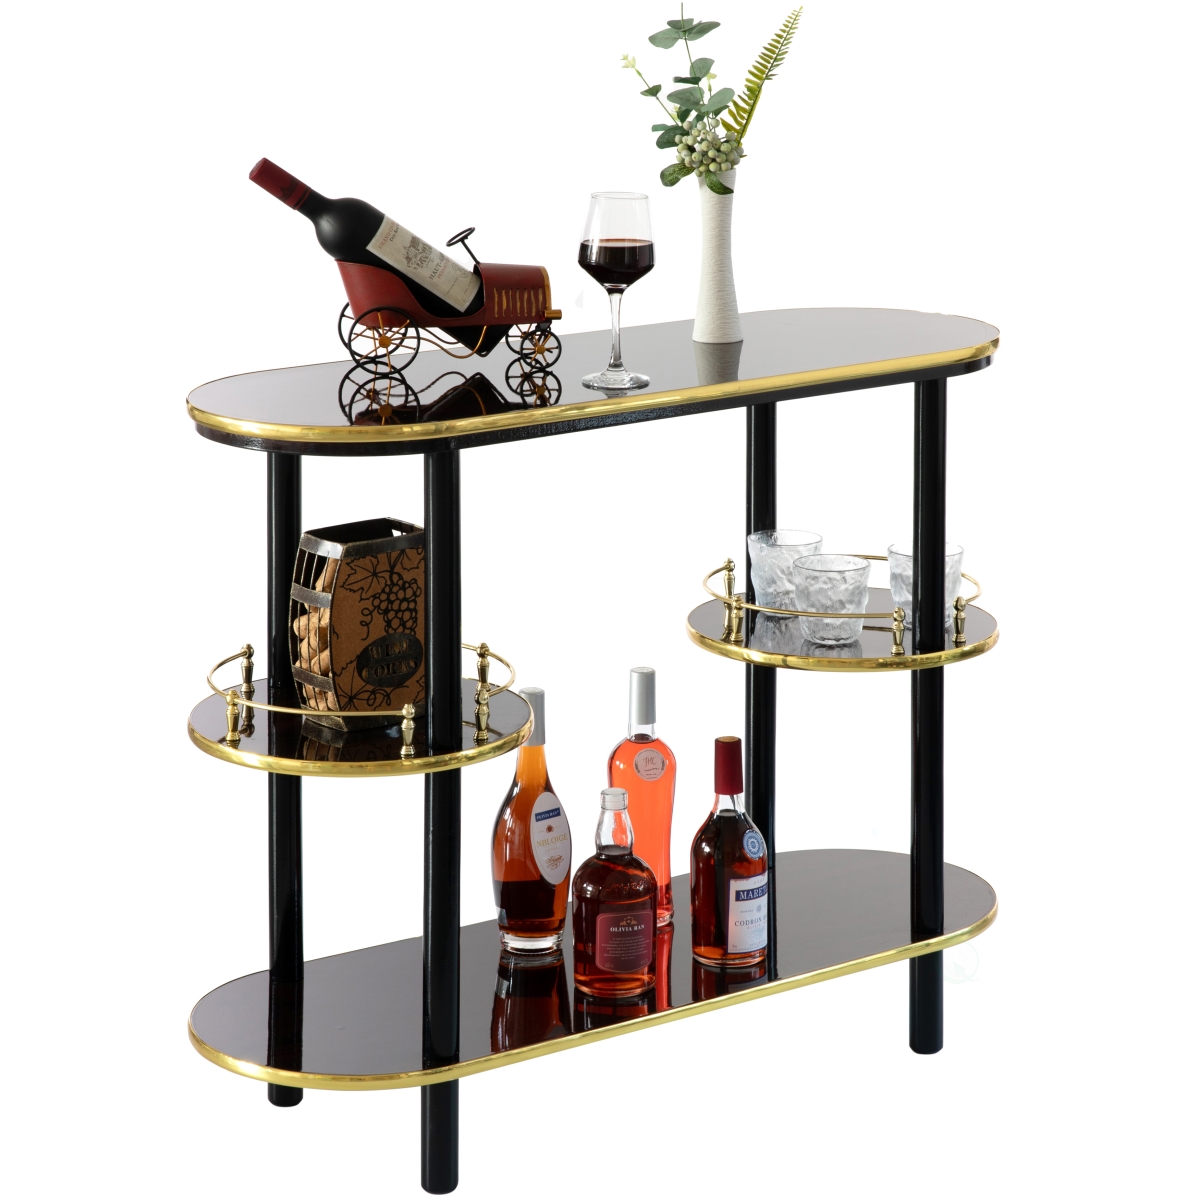 Picture of Fabulaxe QI004485.BN Modern Display Wooden Console Bar with Tiered Open Shelves, Mini Bar with Wine Storage, Brown